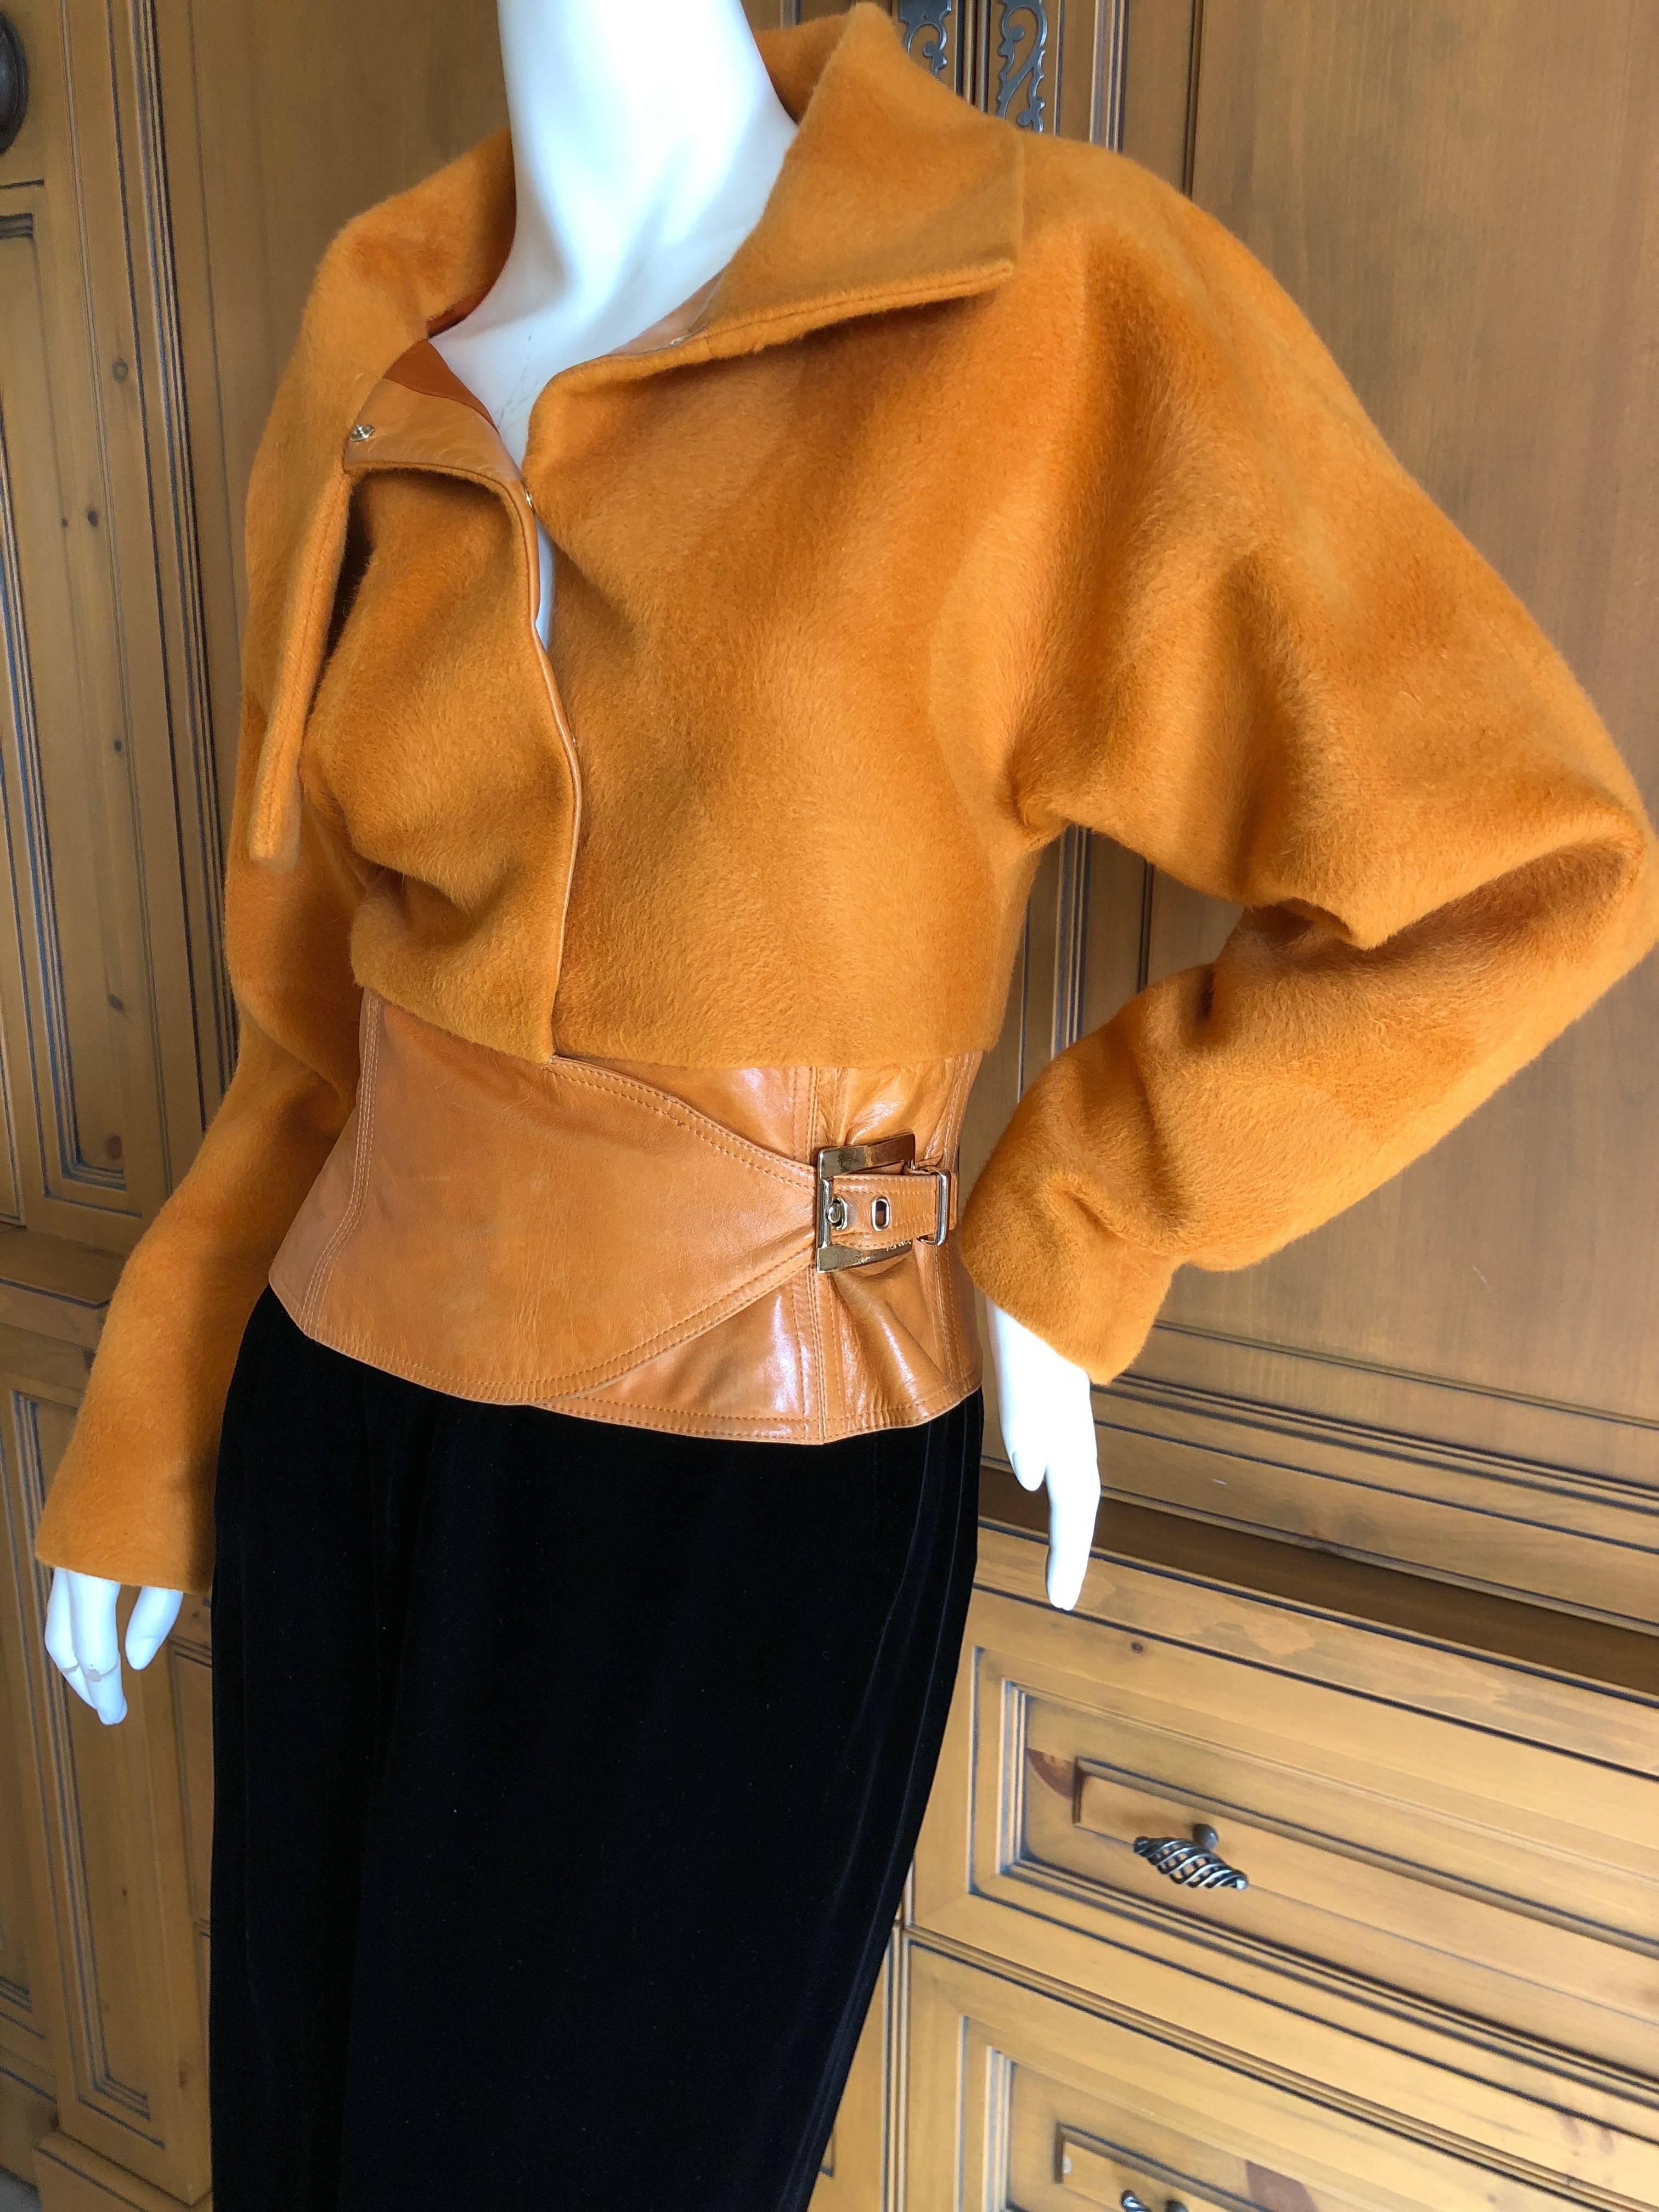 Gianni Versace Couture 1980's Luxurious Orange Wrap Jacket with Leather Trim.

So beautiful, perfect gift for  the Versace lover.
 
Size 38
Bust 36